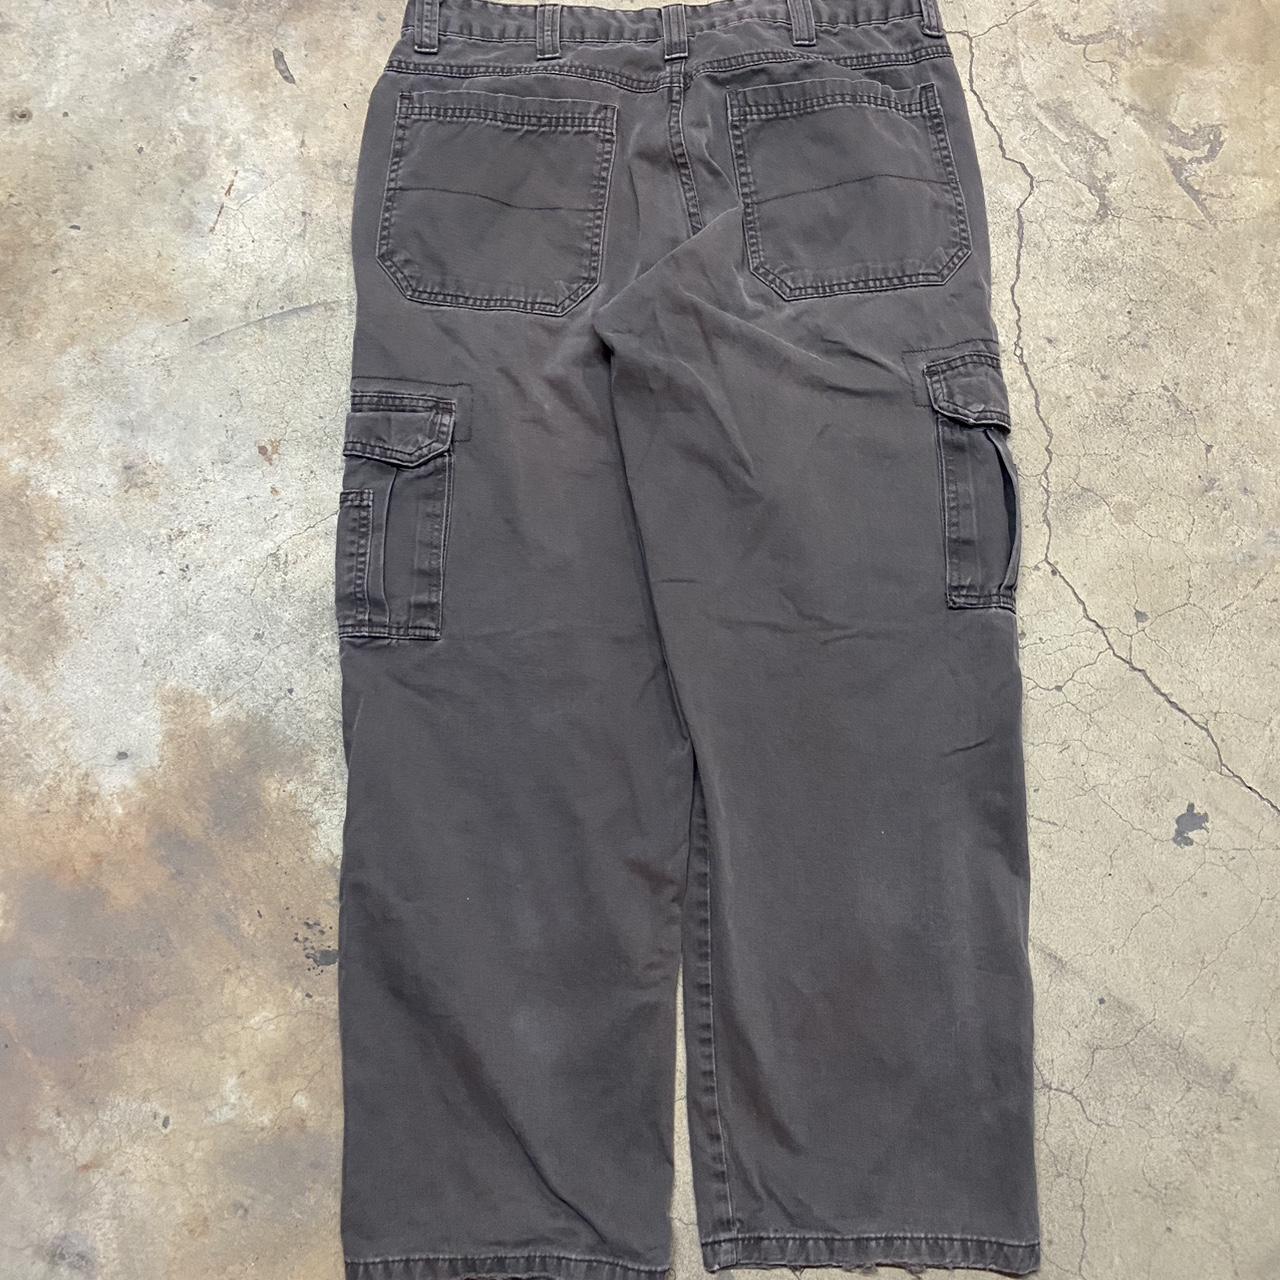 Vintage wrangler with nice fade to it. Fits nicely,... - Depop